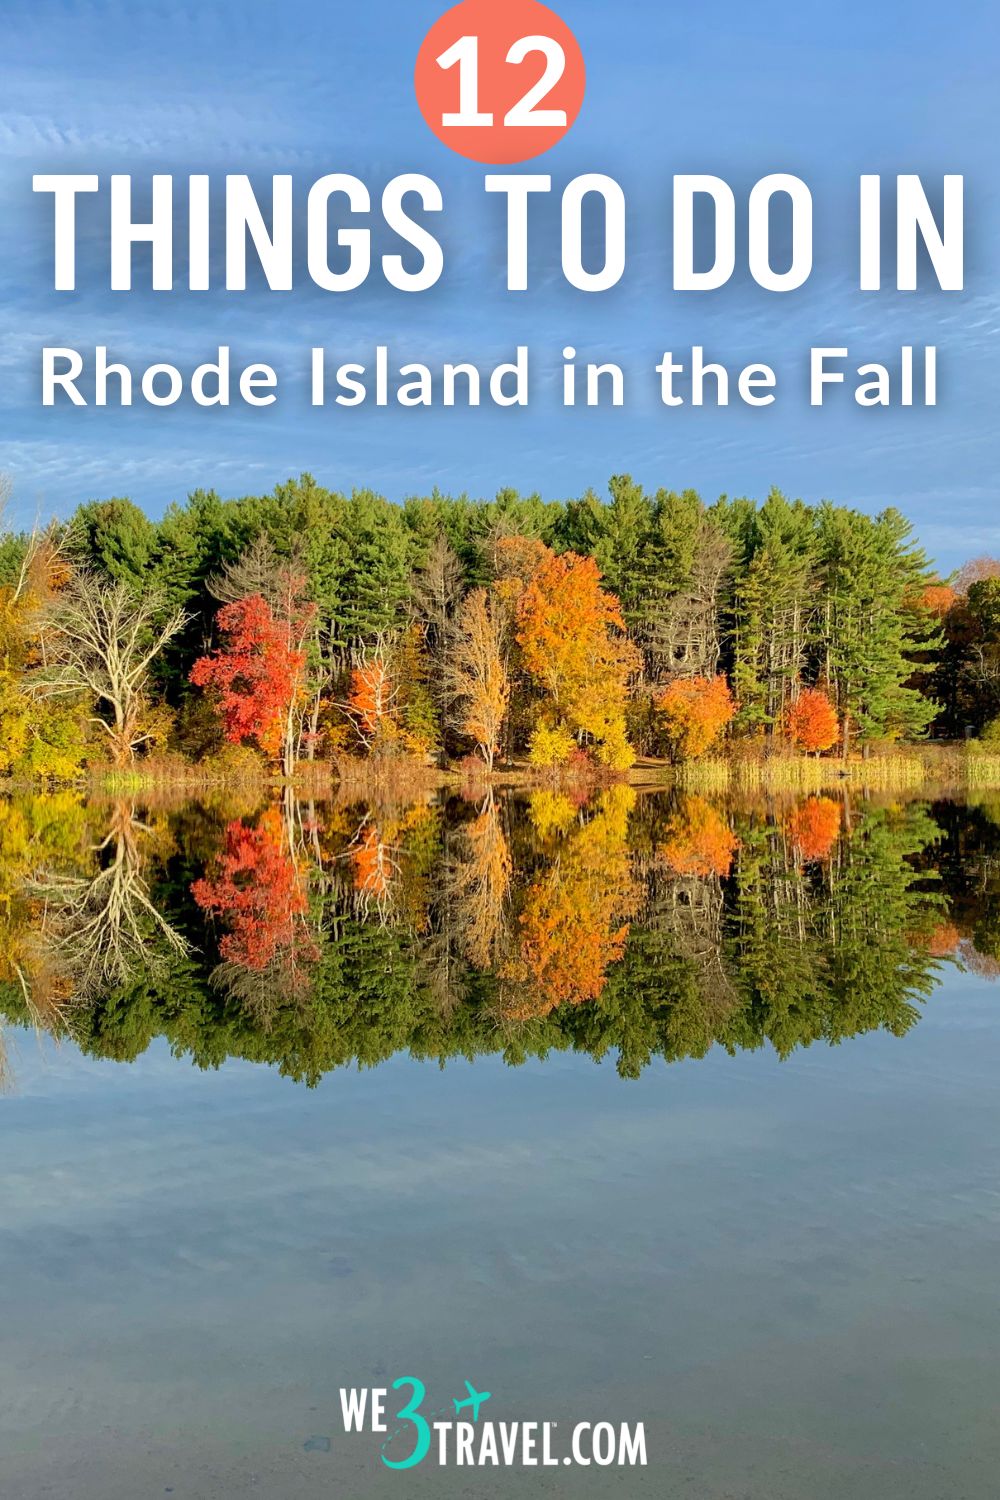 12 Things to do in Rhode Island in the Fall